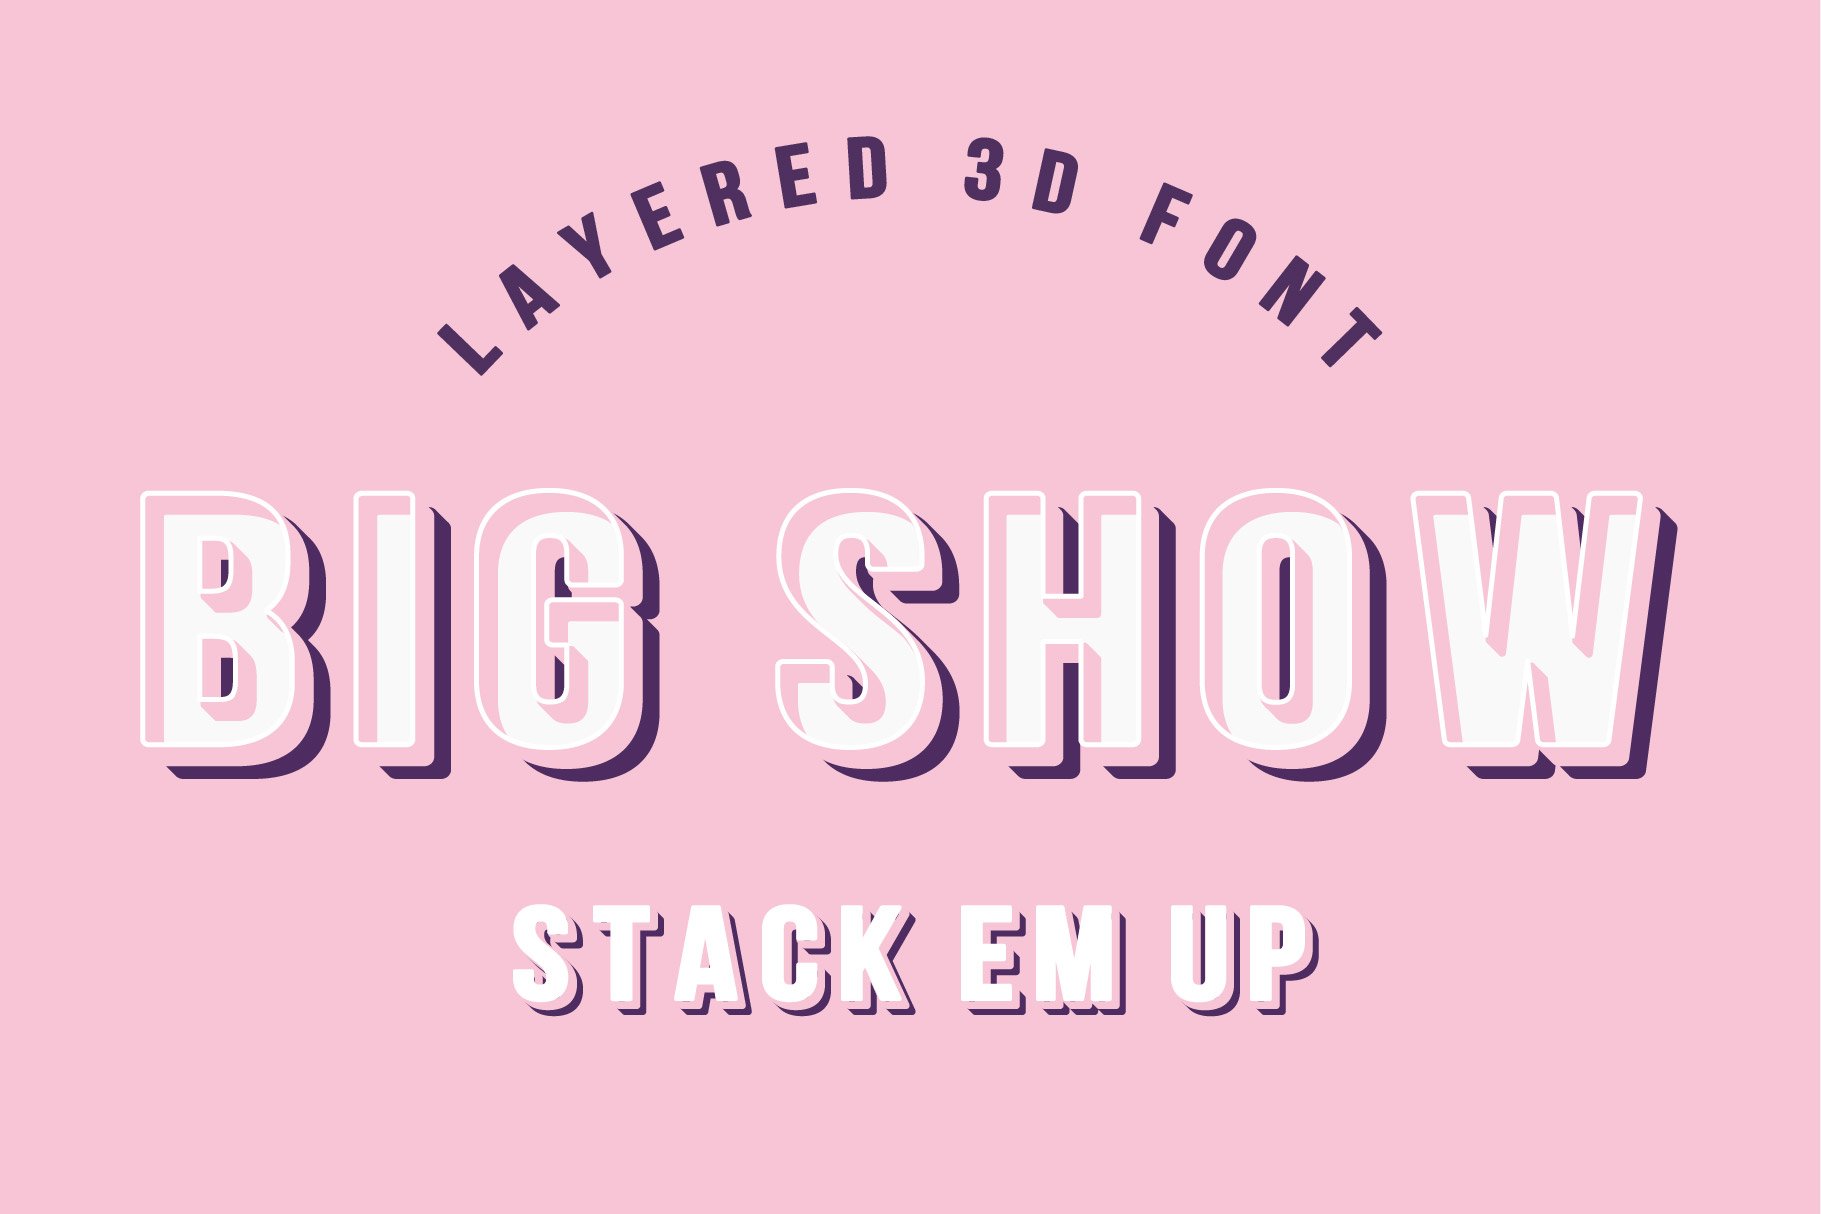 BIG SHOW - Layered 3D font cover image.